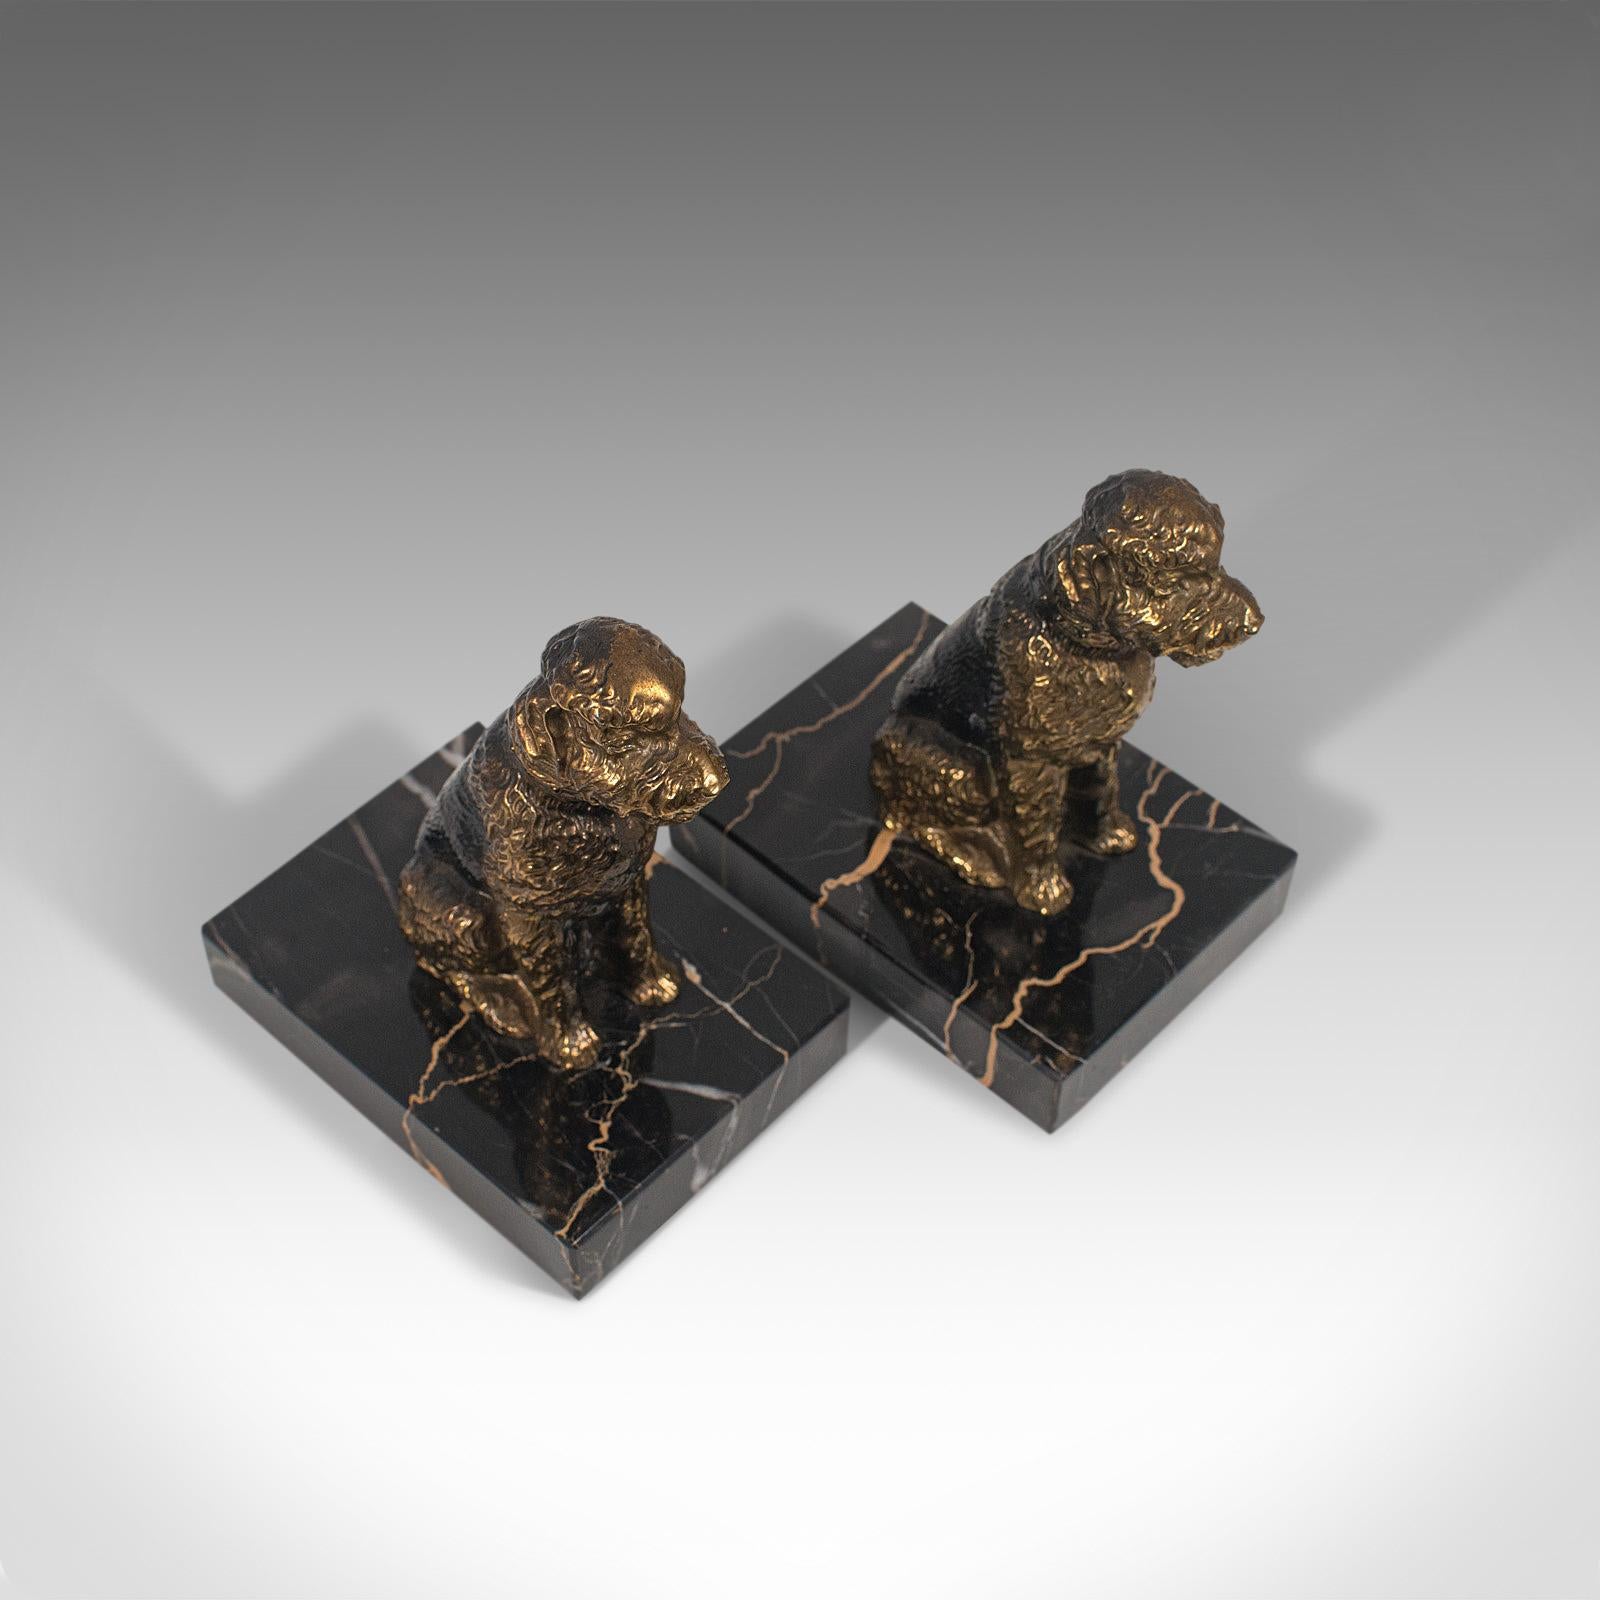 Pair of Vintage Dog Figures, English, Gilt Metal, Airedale Terrier, circa 1980 In Good Condition For Sale In Hele, Devon, GB